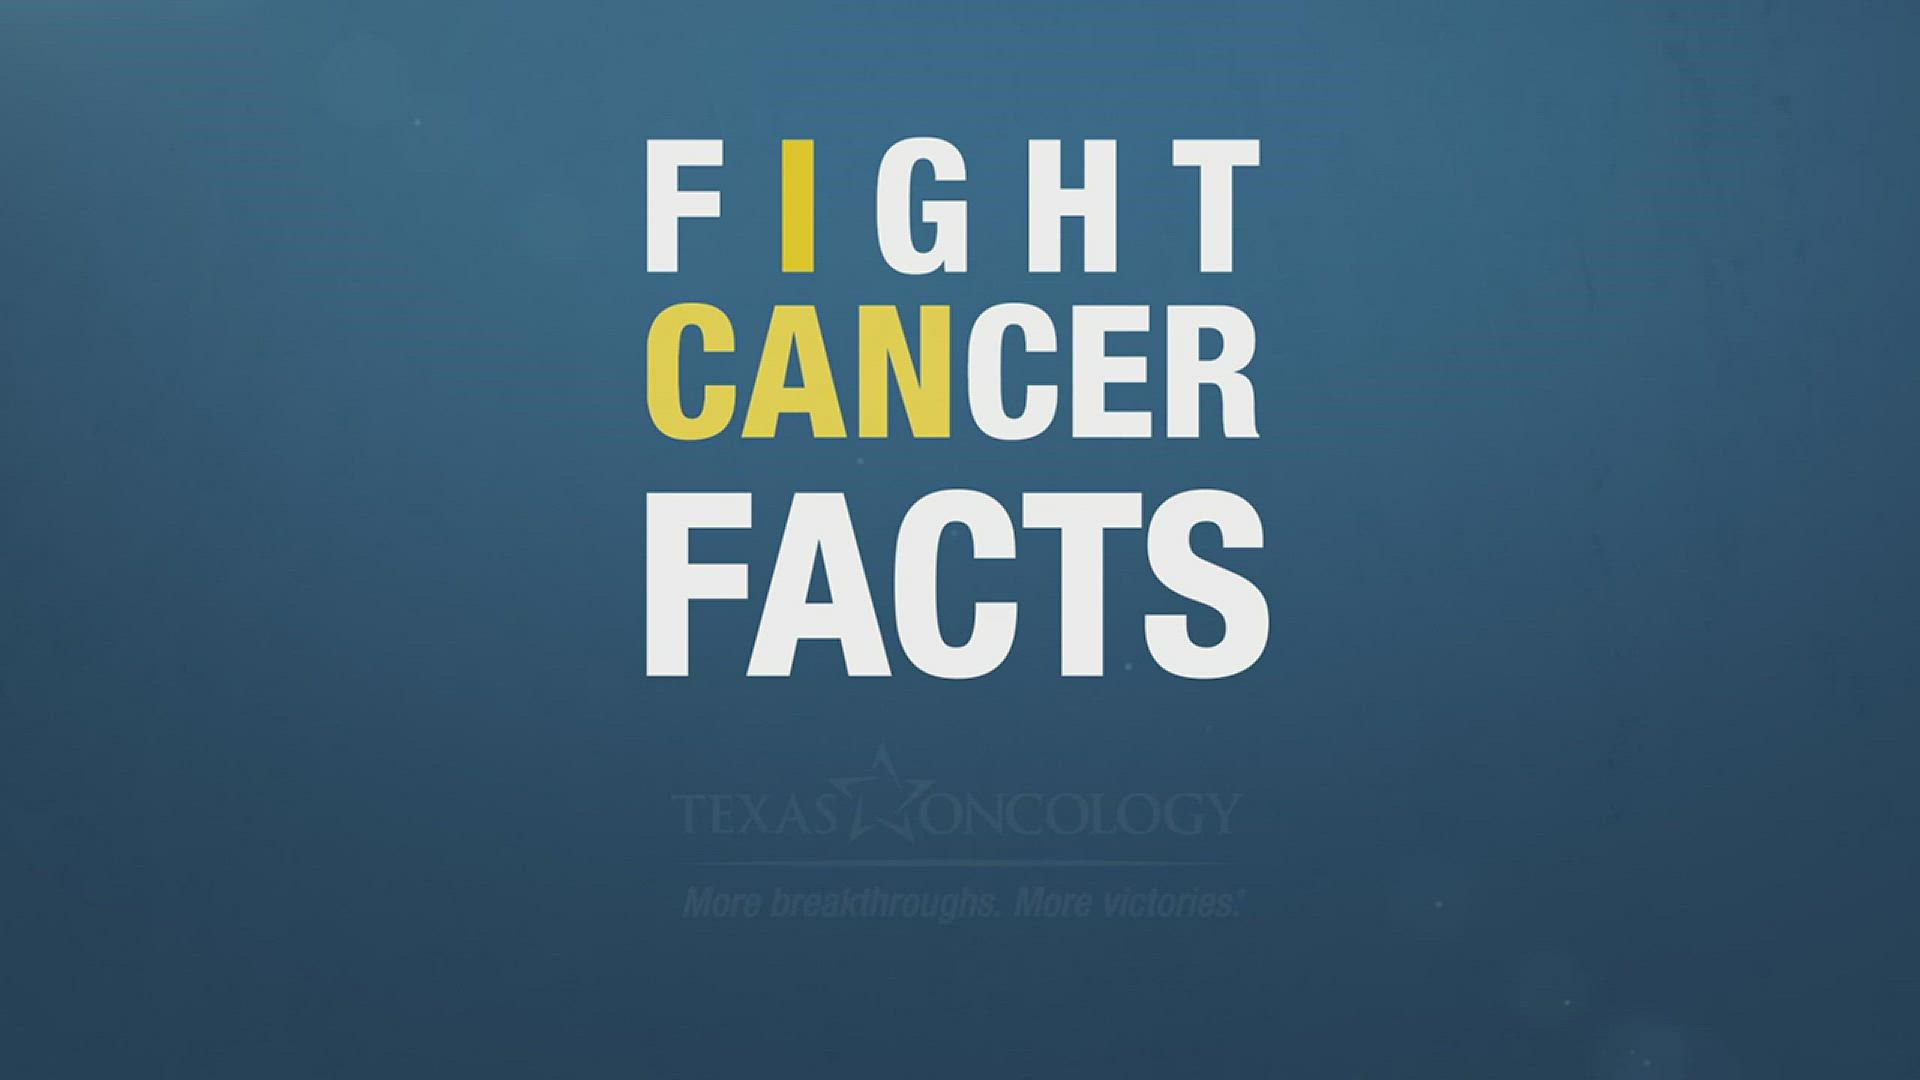 Local Texas Oncology doctor explains immunotherapy and how it is used to fit cancer.